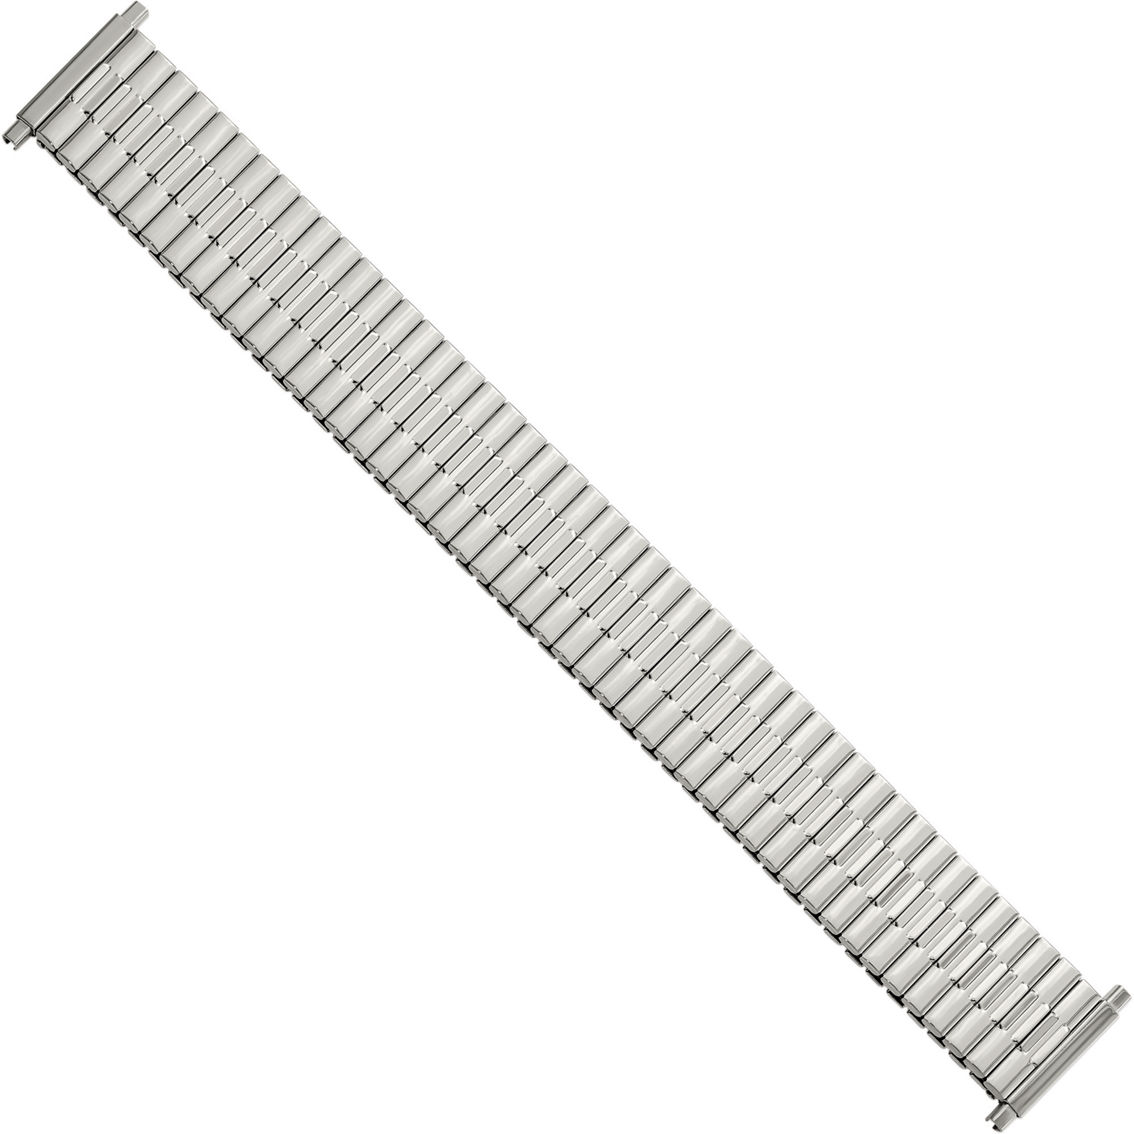 Gilden Men's Long 20-24mm Stainless Steel Expansion Watch Band - Image 2 of 3